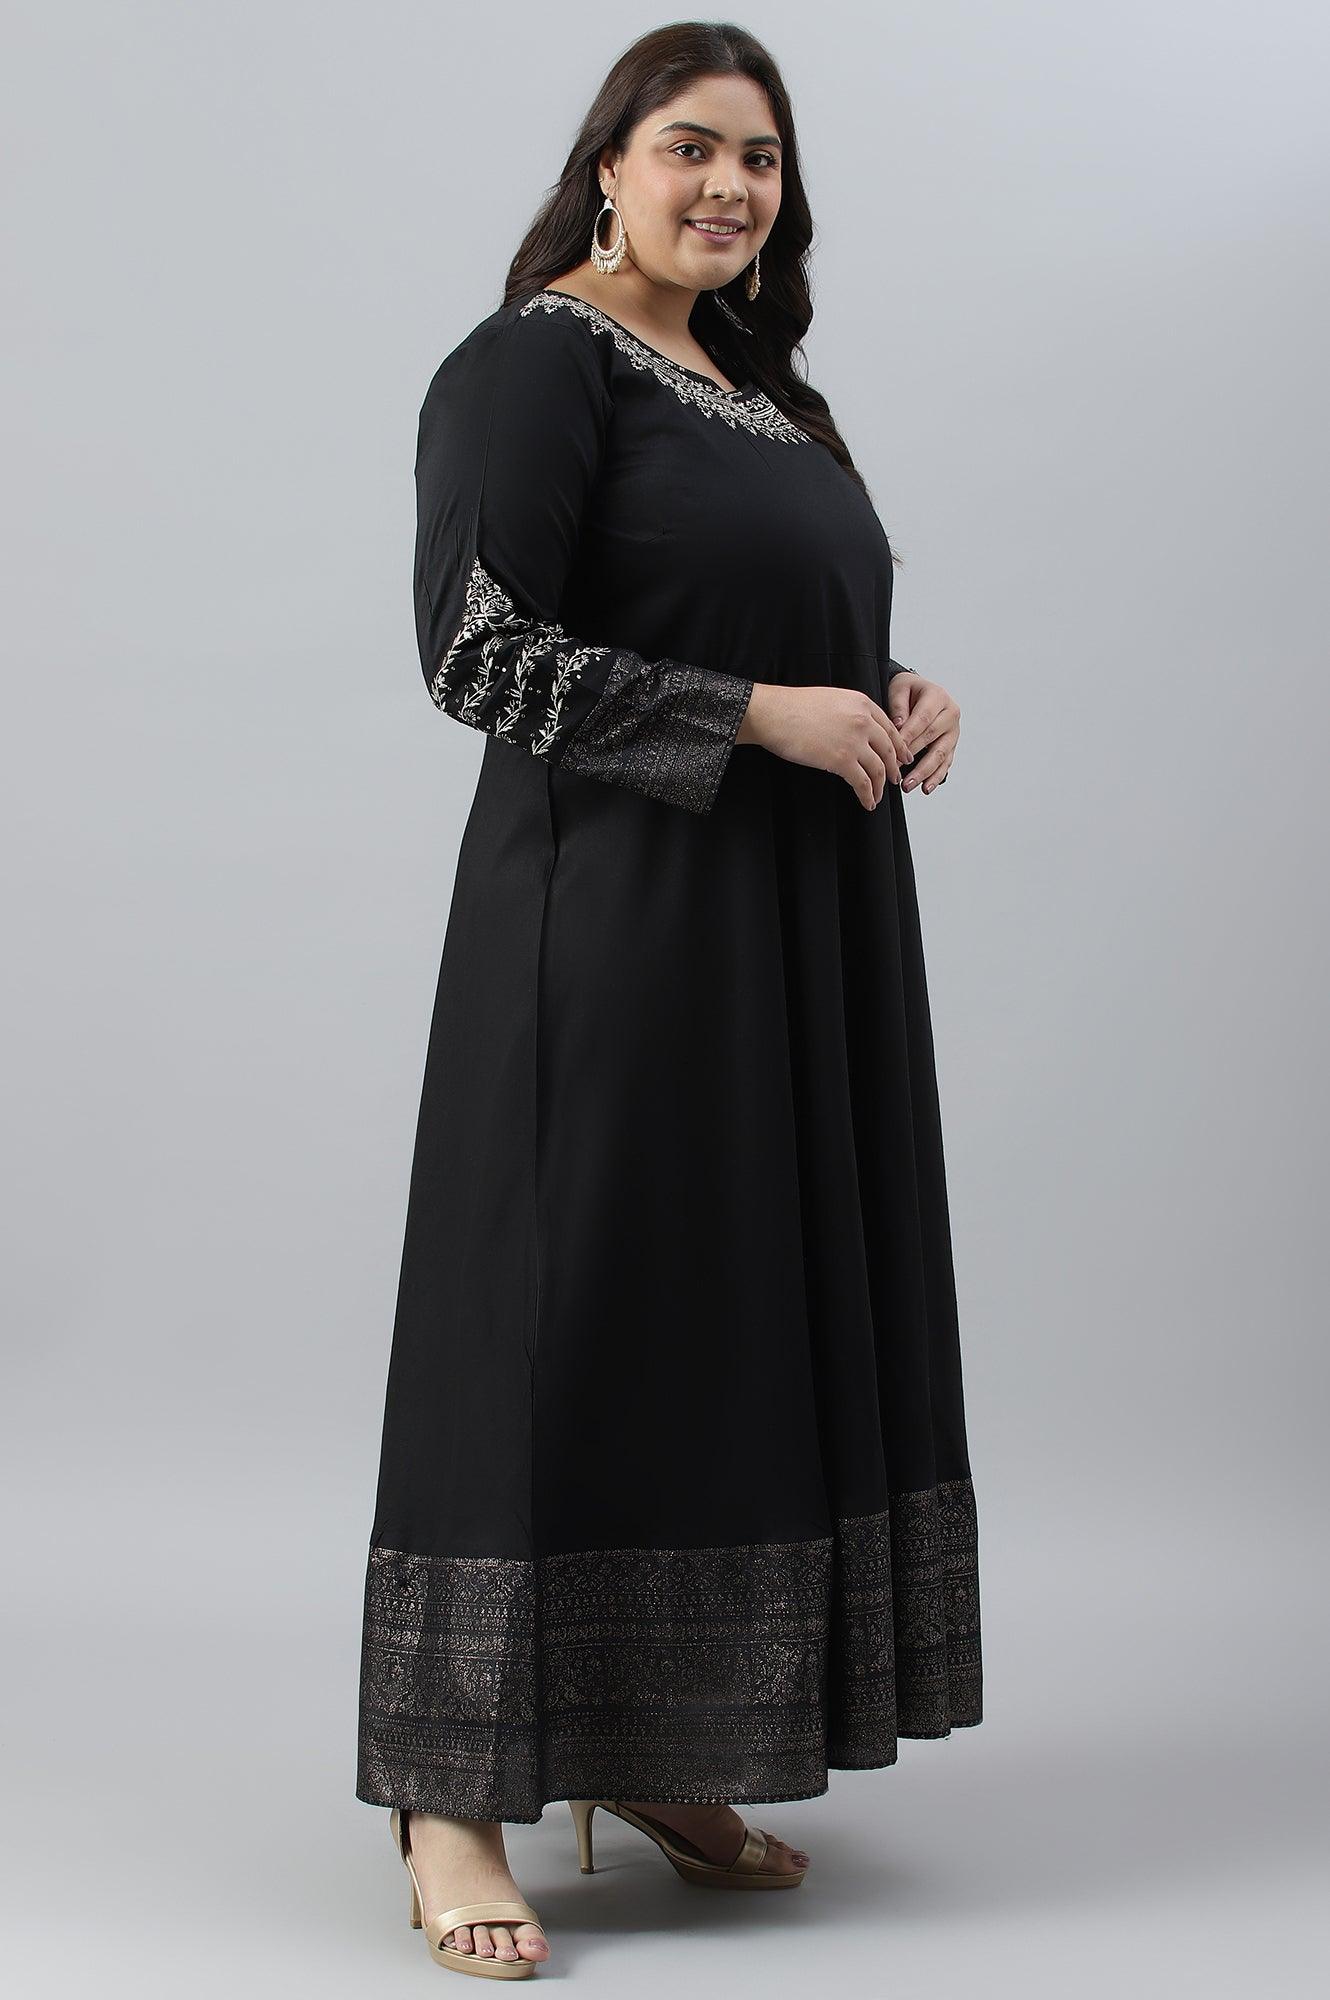 Black Glitter Printed And Embroidered Plus Size Dress - wforwoman